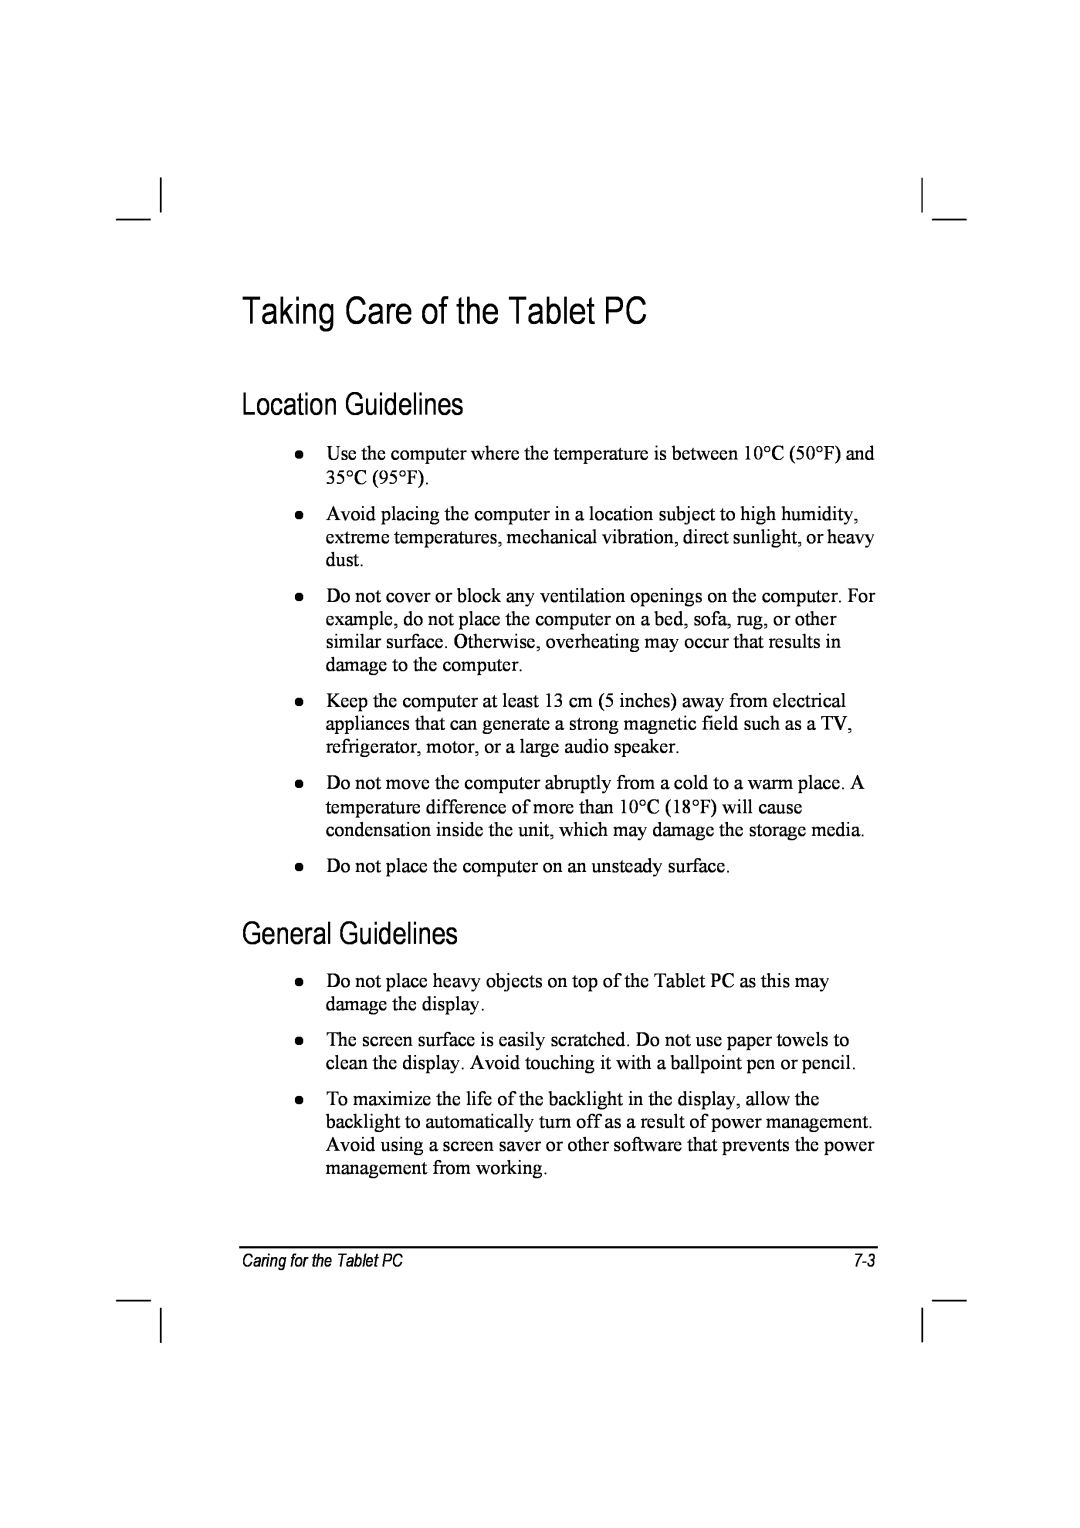 TAG 10 manual Taking Care of the Tablet PC, Location Guidelines, General Guidelines 